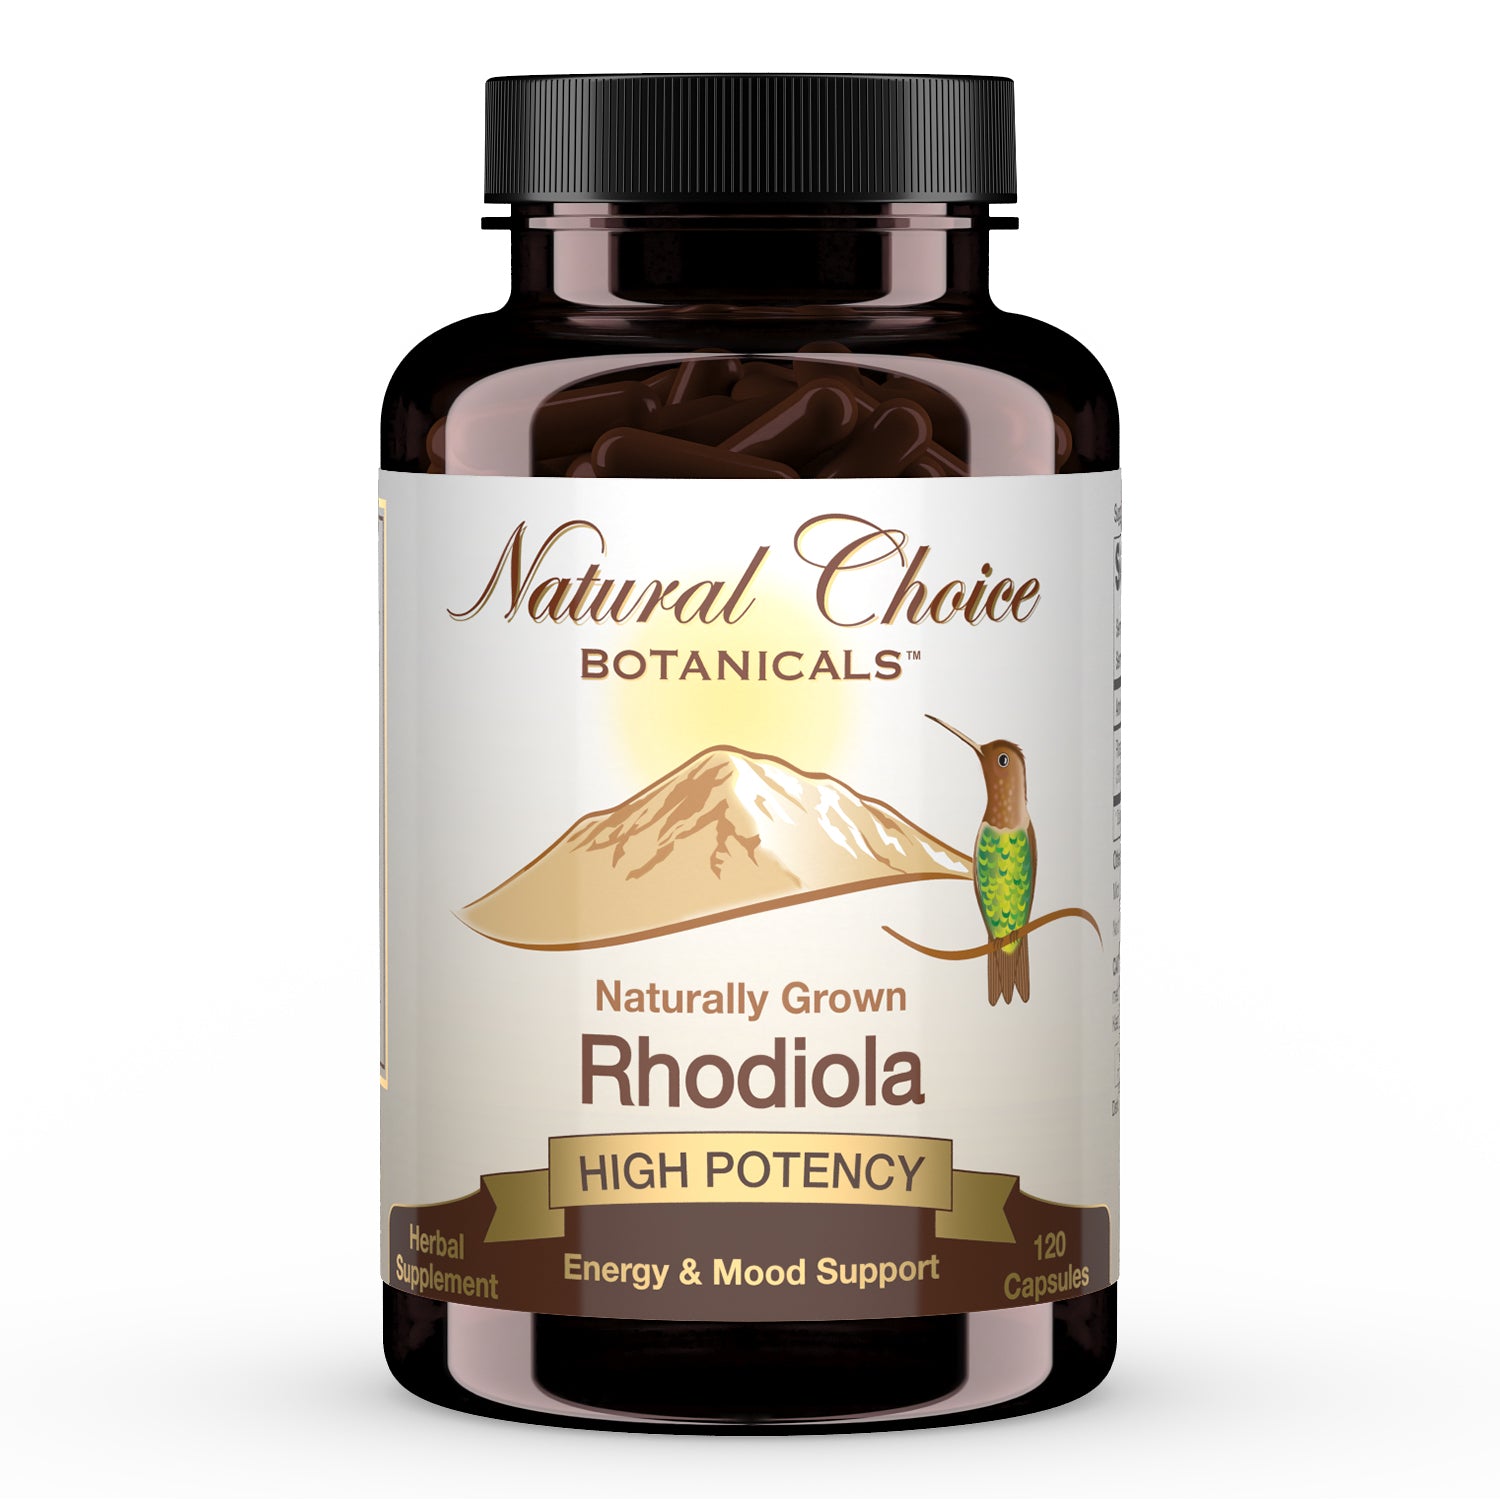 Rhodiola Extract Supplement - 120 Capsules